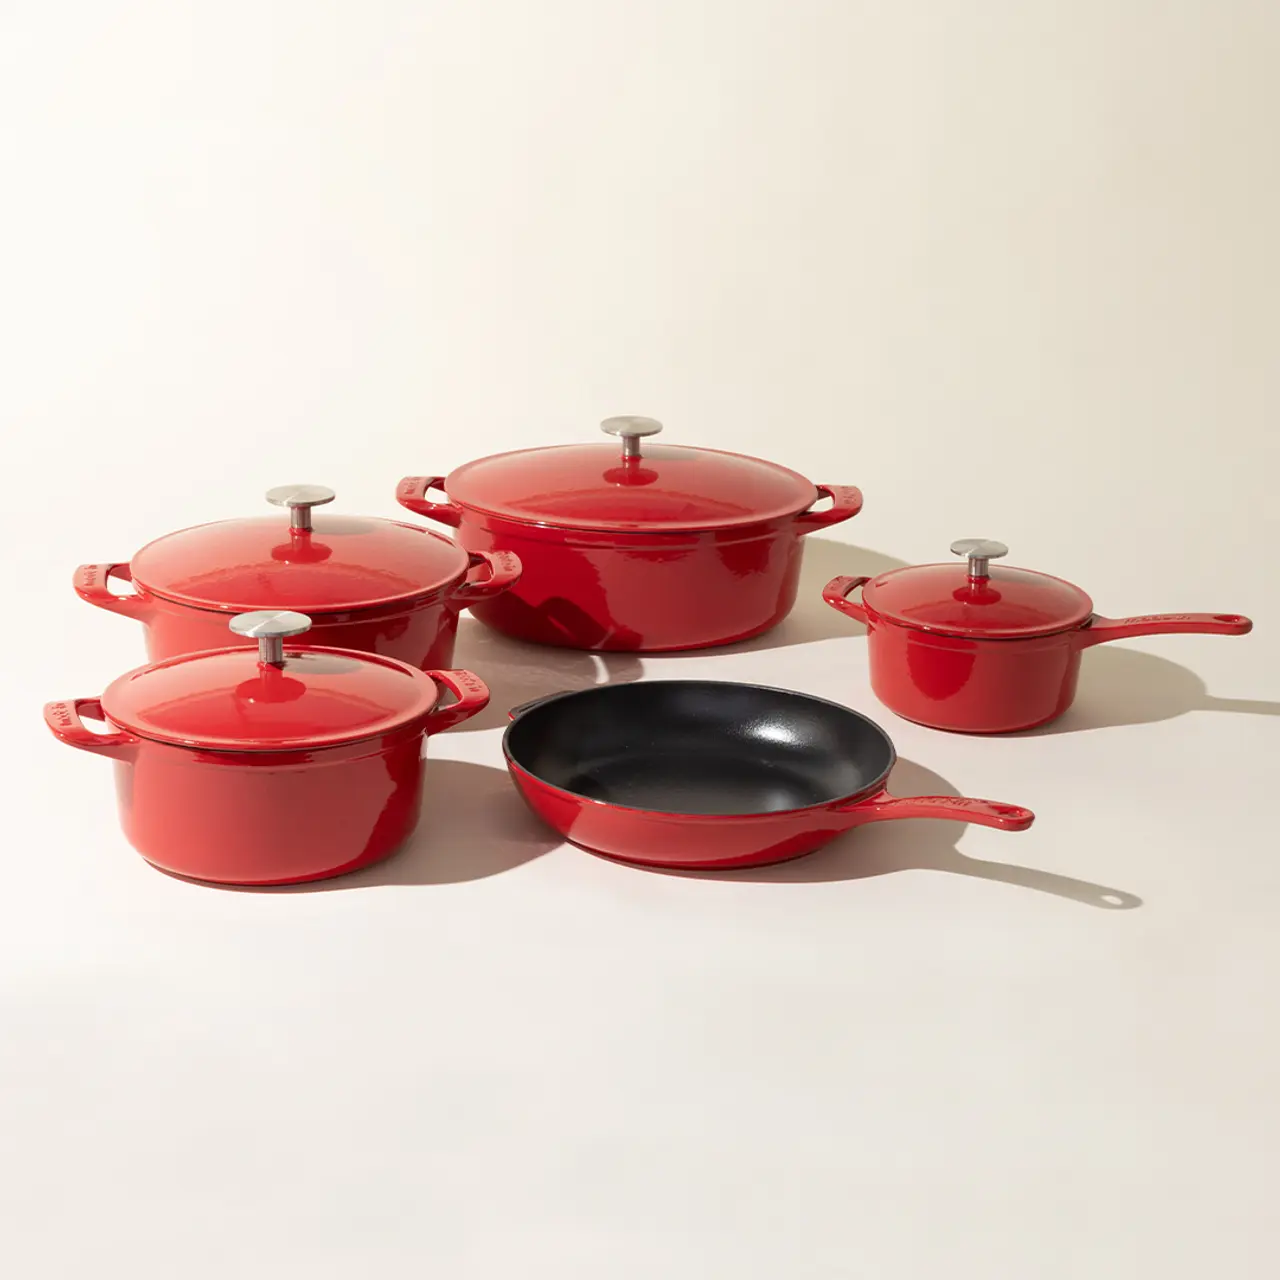 A set of red cookware with various pots and a pan, each with matching lids, displayed against a neutral background.